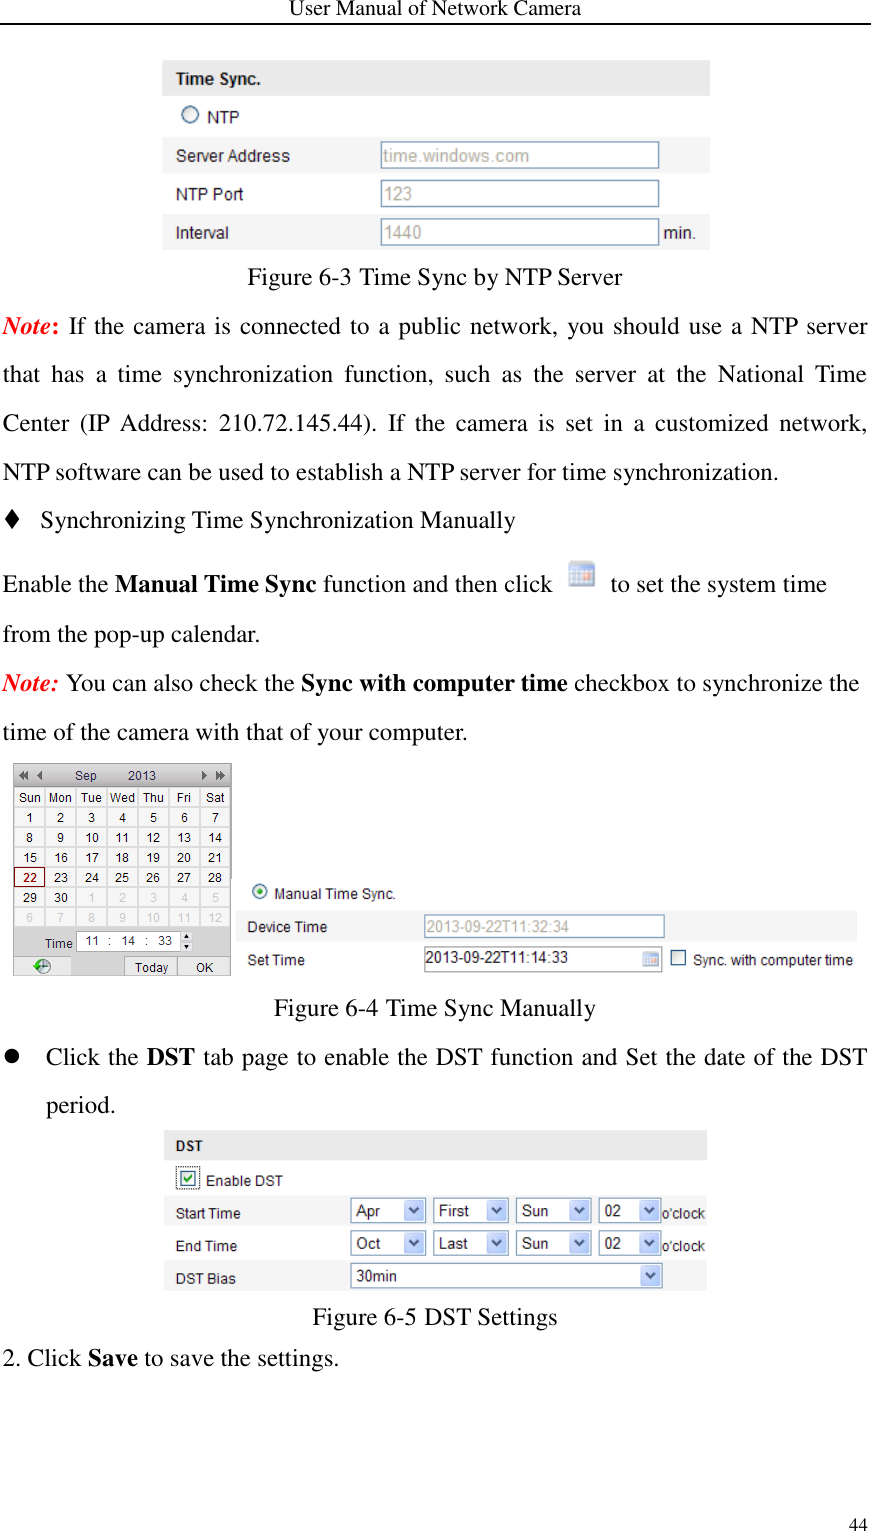 User Manual of Network Camera 44   Figure 6-3 Time Sync by NTP Server Note: If the camera is connected to a public network, you should use a NTP server that  has  a  time  synchronization  function,  such  as  the  server  at  the  National  Time Center  (IP  Address:  210.72.145.44).  If the  camera  is  set  in  a  customized  network, NTP software can be used to establish a NTP server for time synchronization.  Synchronizing Time Synchronization Manually Enable the Manual Time Sync function and then click    to set the system time from the pop-up calendar. Note: You can also check the Sync with computer time checkbox to synchronize the time of the camera with that of your computer.  Figure 6-4 Time Sync Manually  Click the DST tab page to enable the DST function and Set the date of the DST period.  Figure 6-5 DST Settings 2. Click Save to save the settings. 